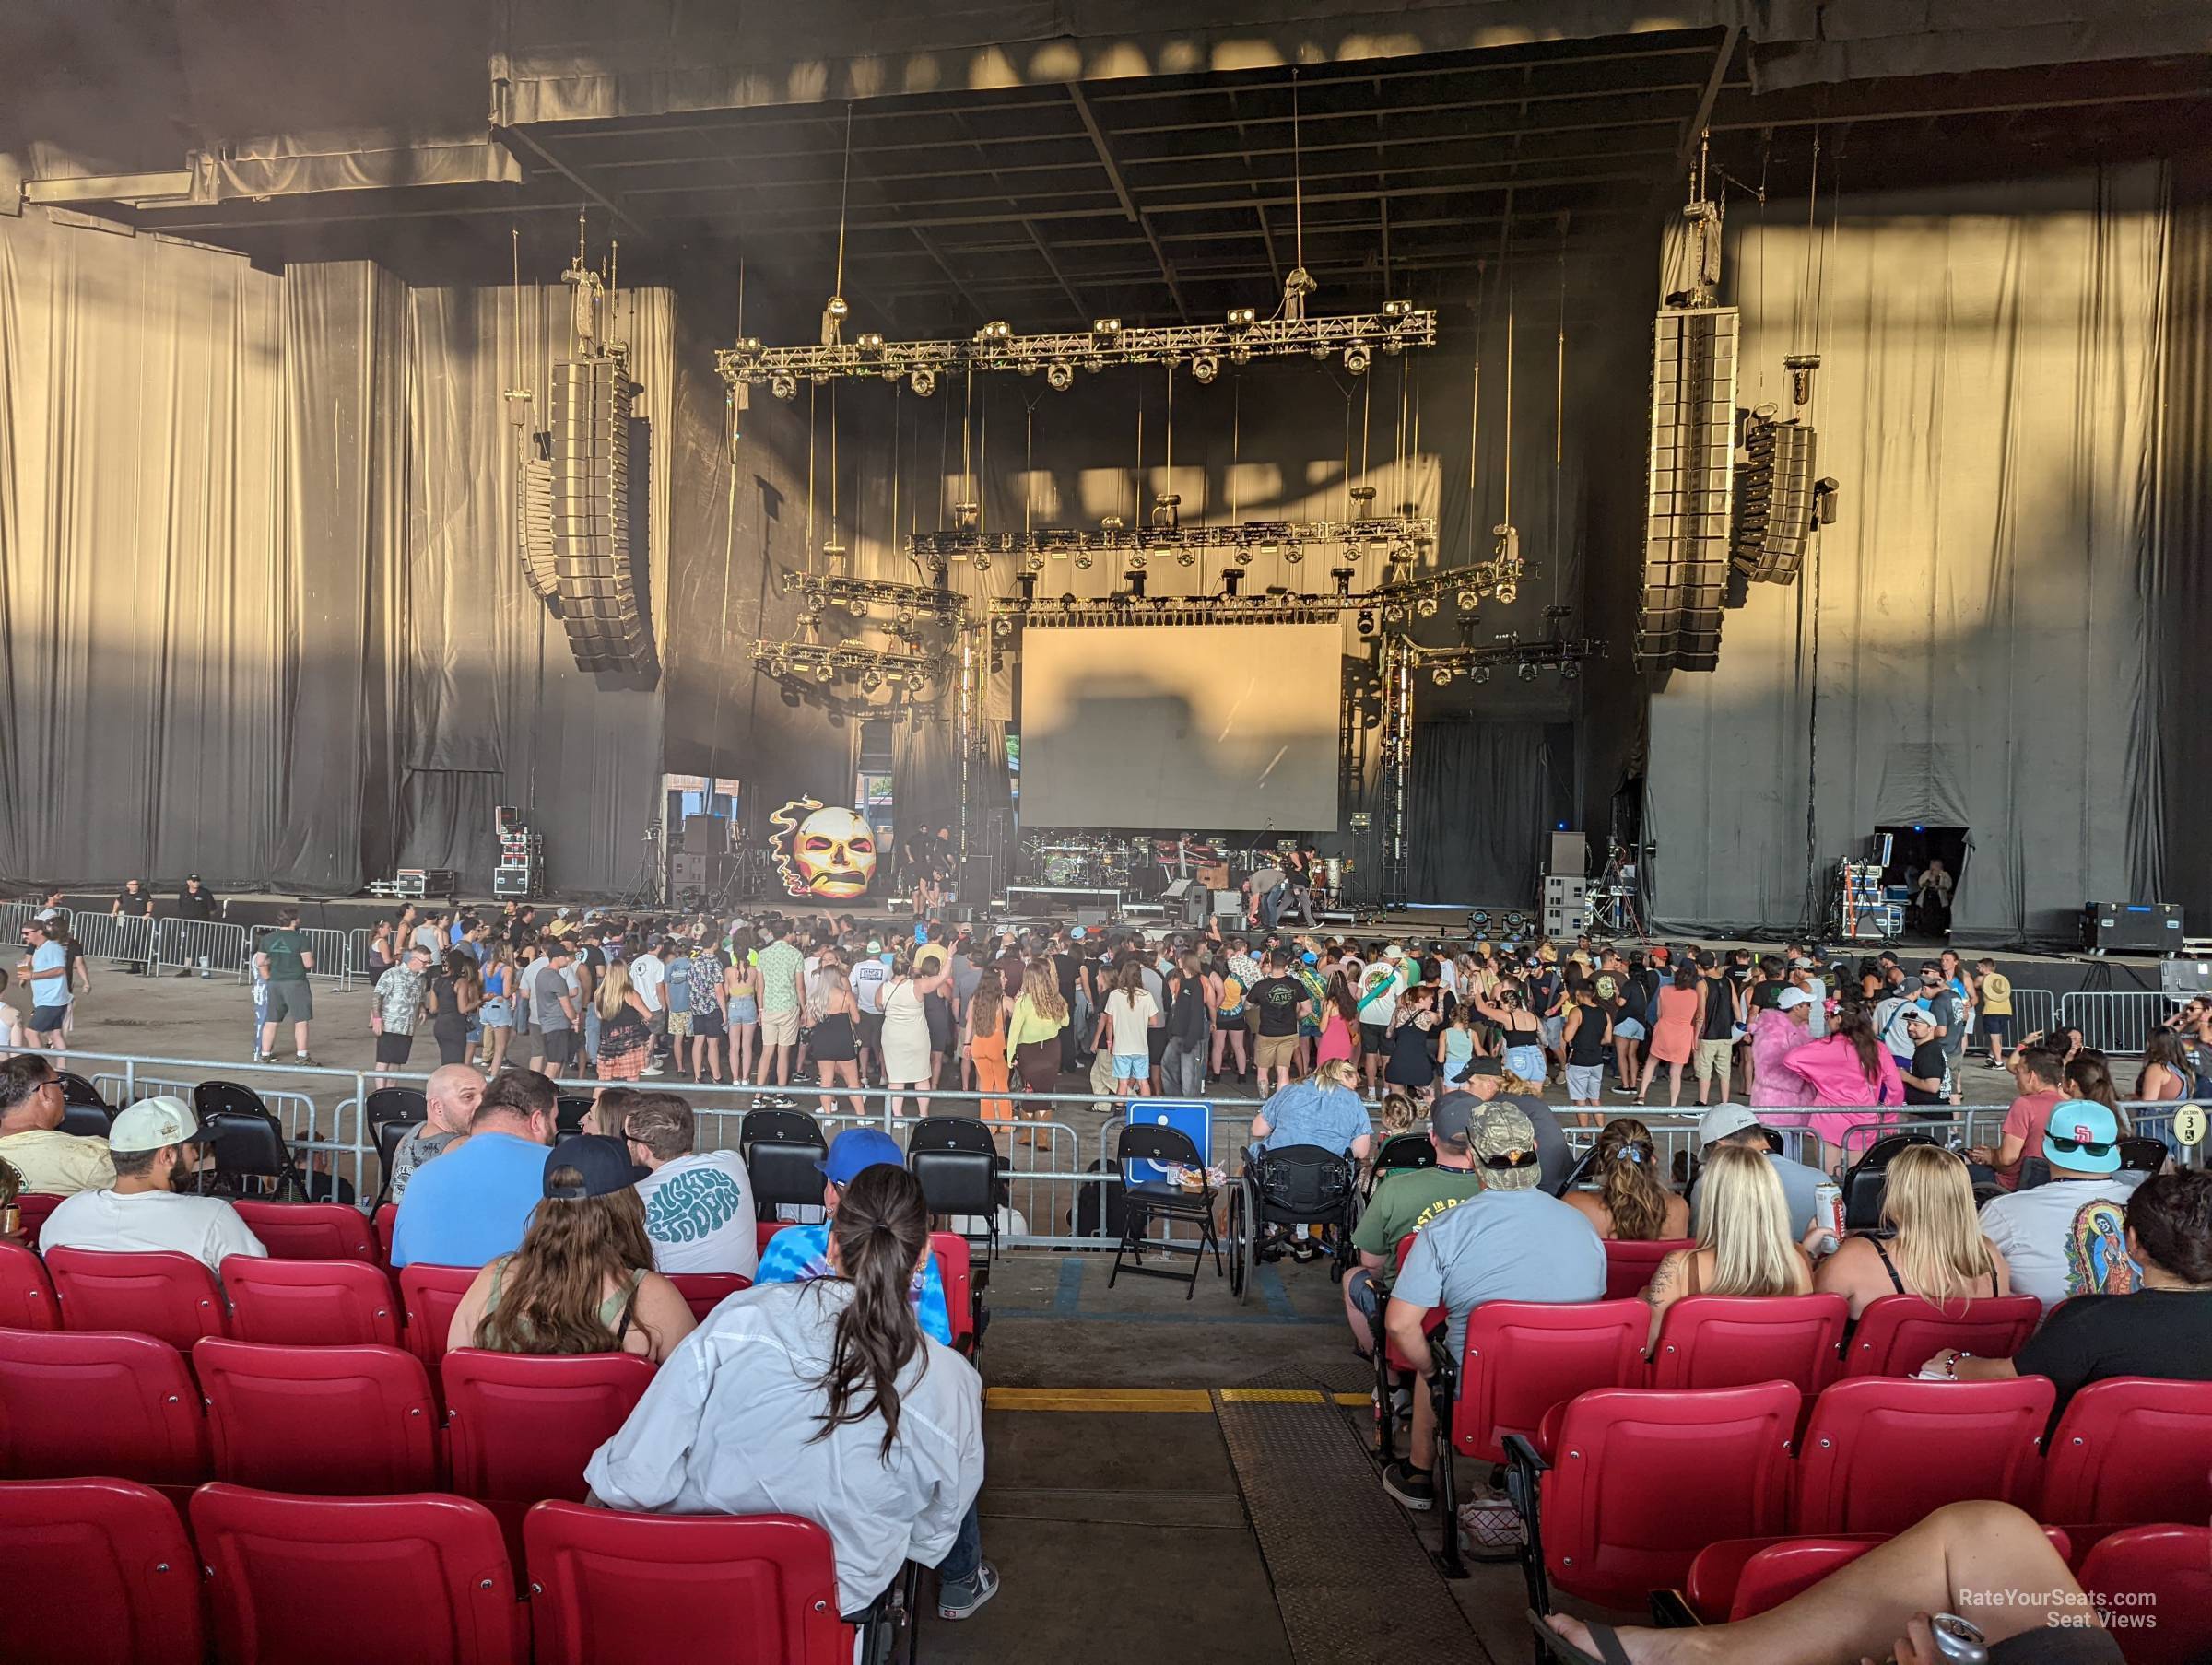 Section 103 at White River Amphitheatre